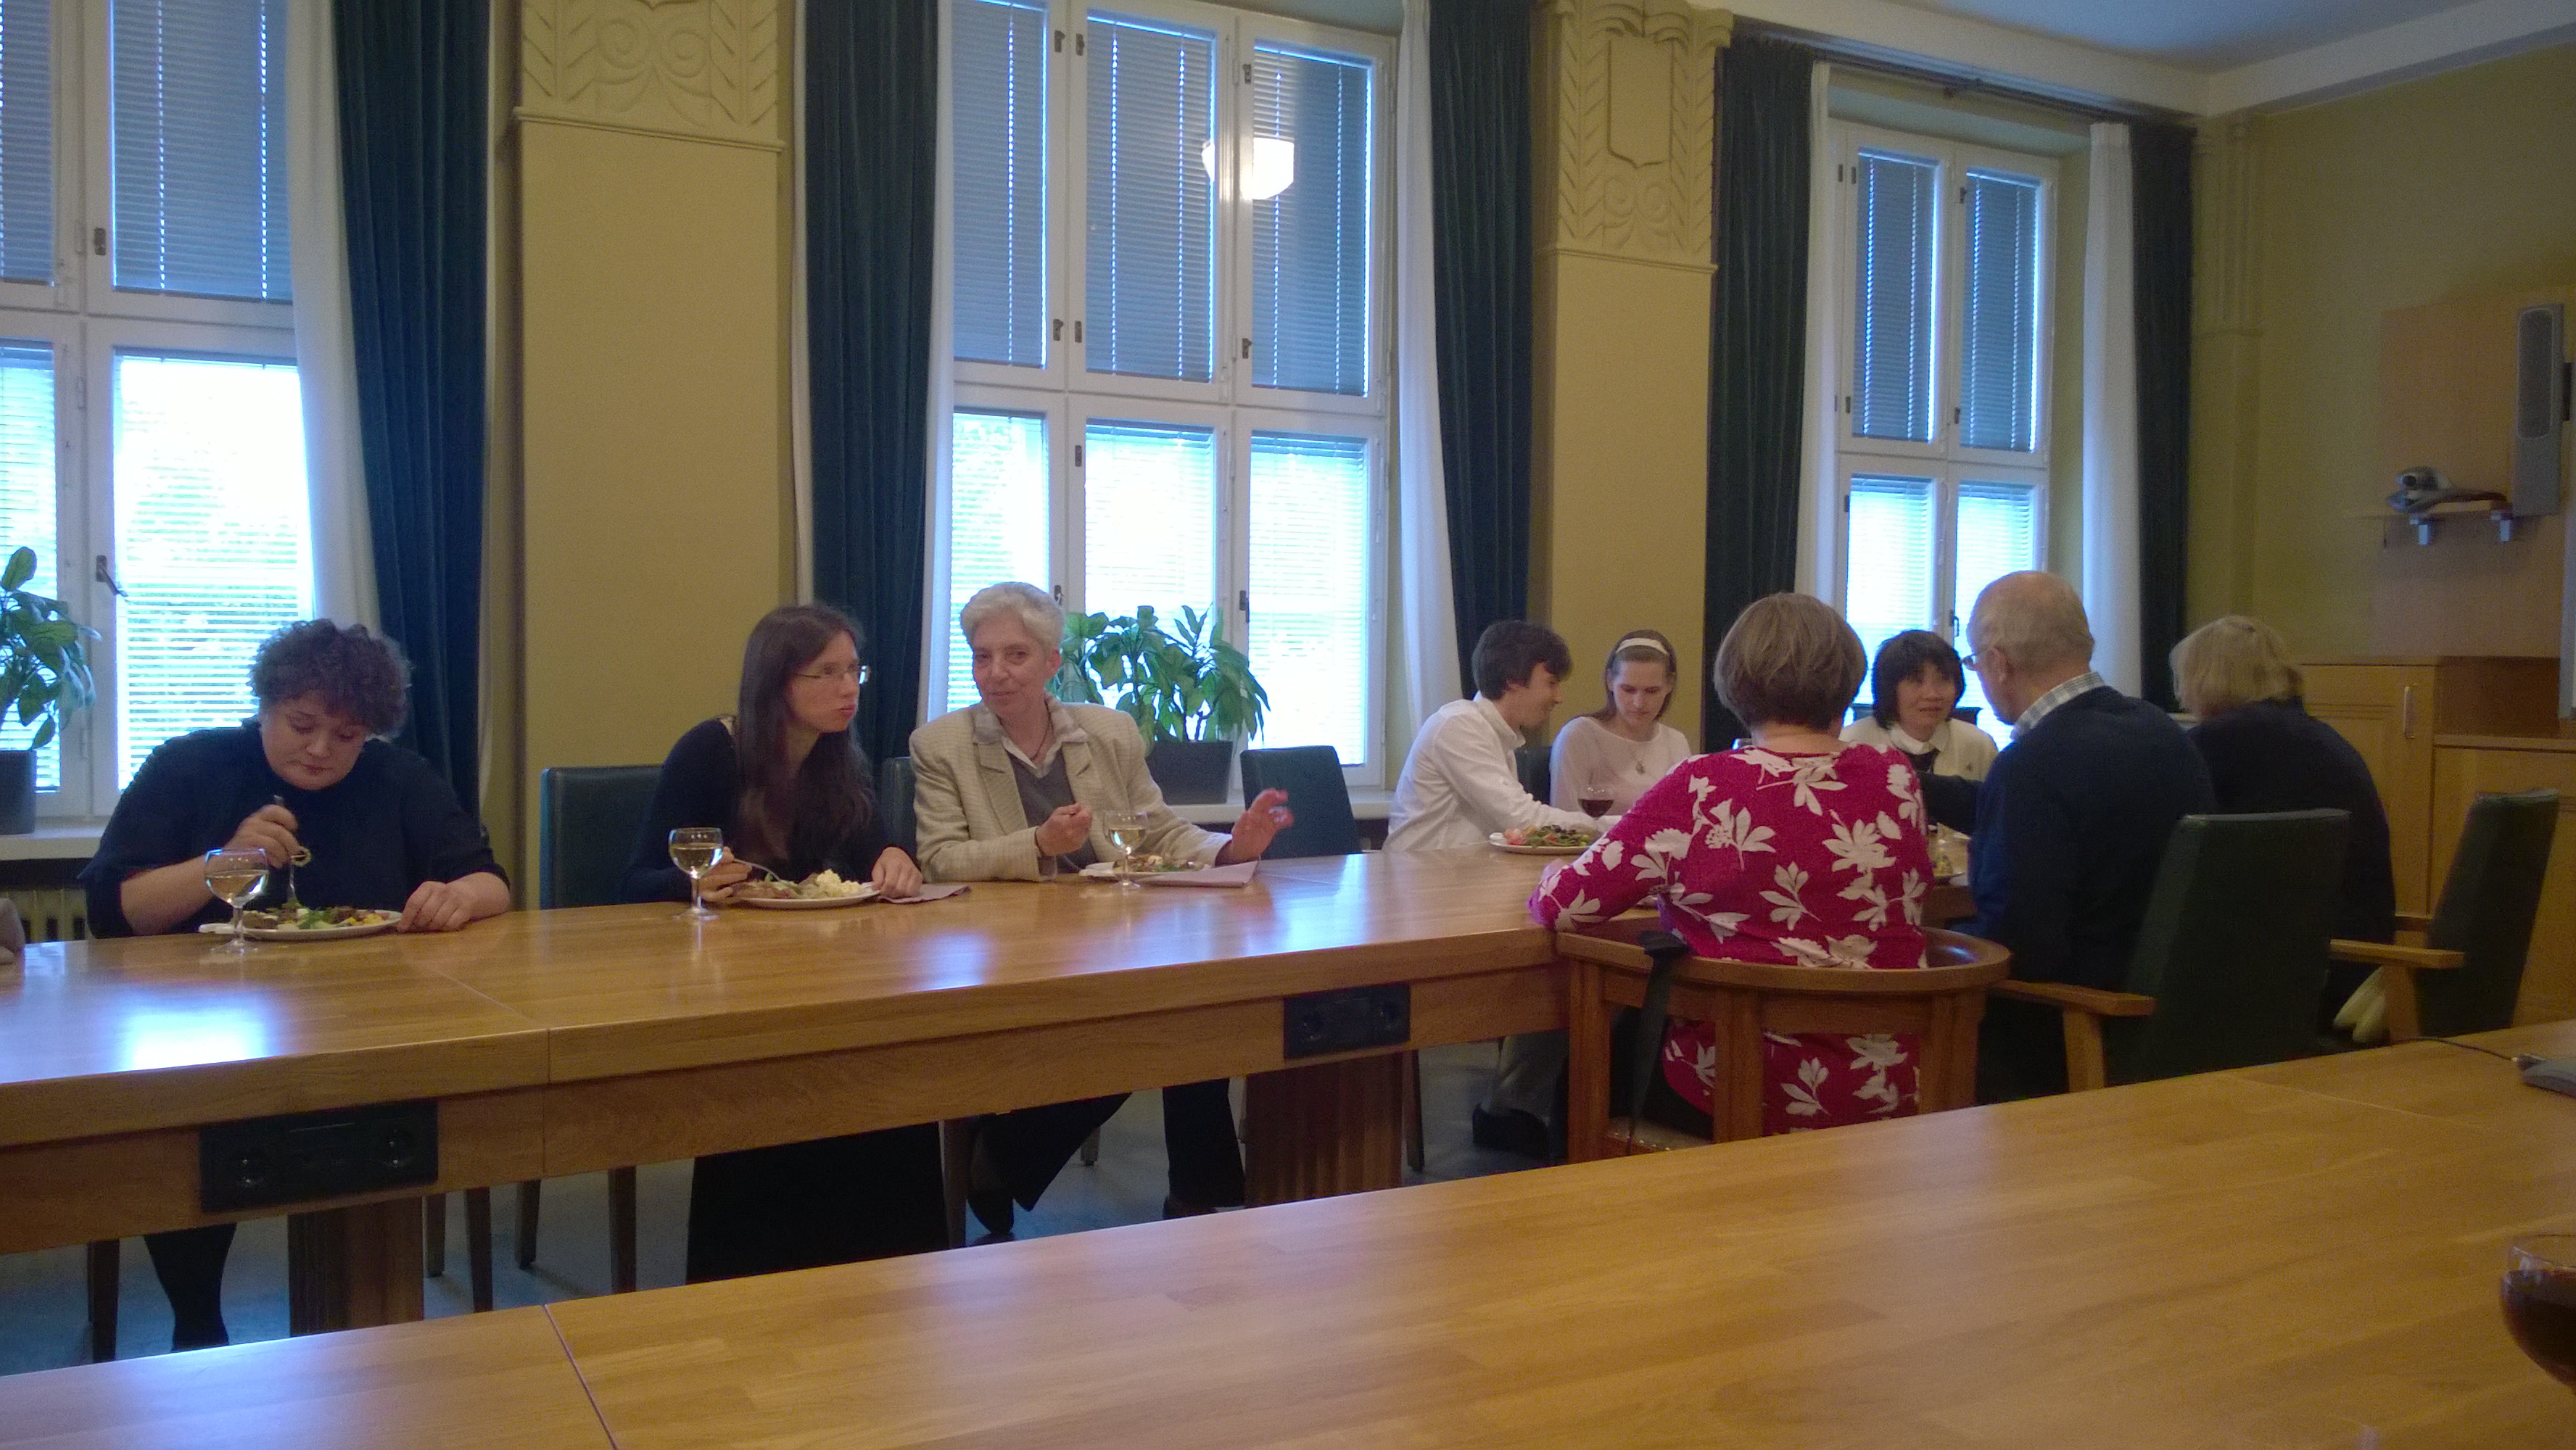 Eating dinner and conversing together at a reception hosted by the City of Joensuu.